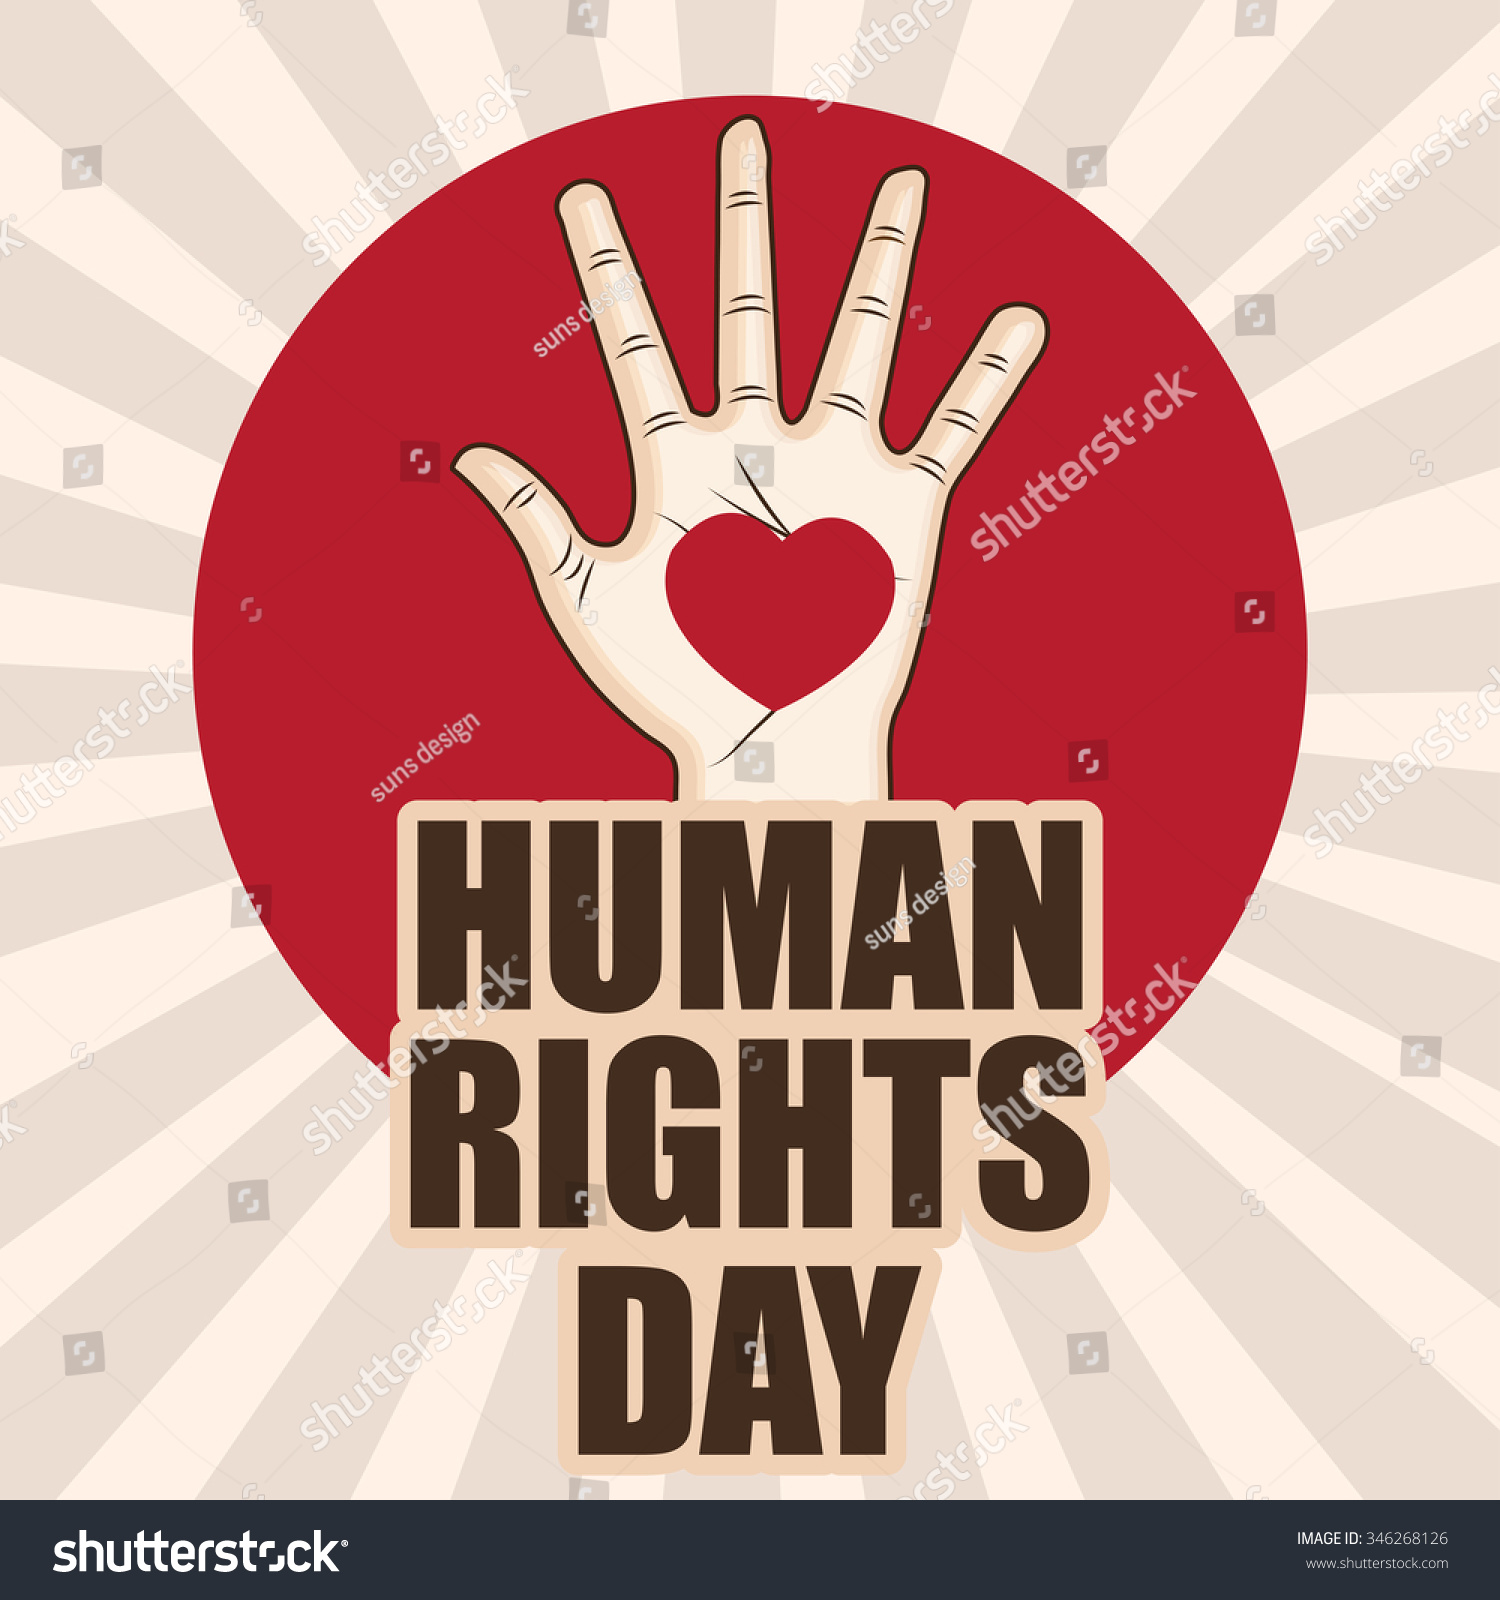 clip art for human rights - photo #47